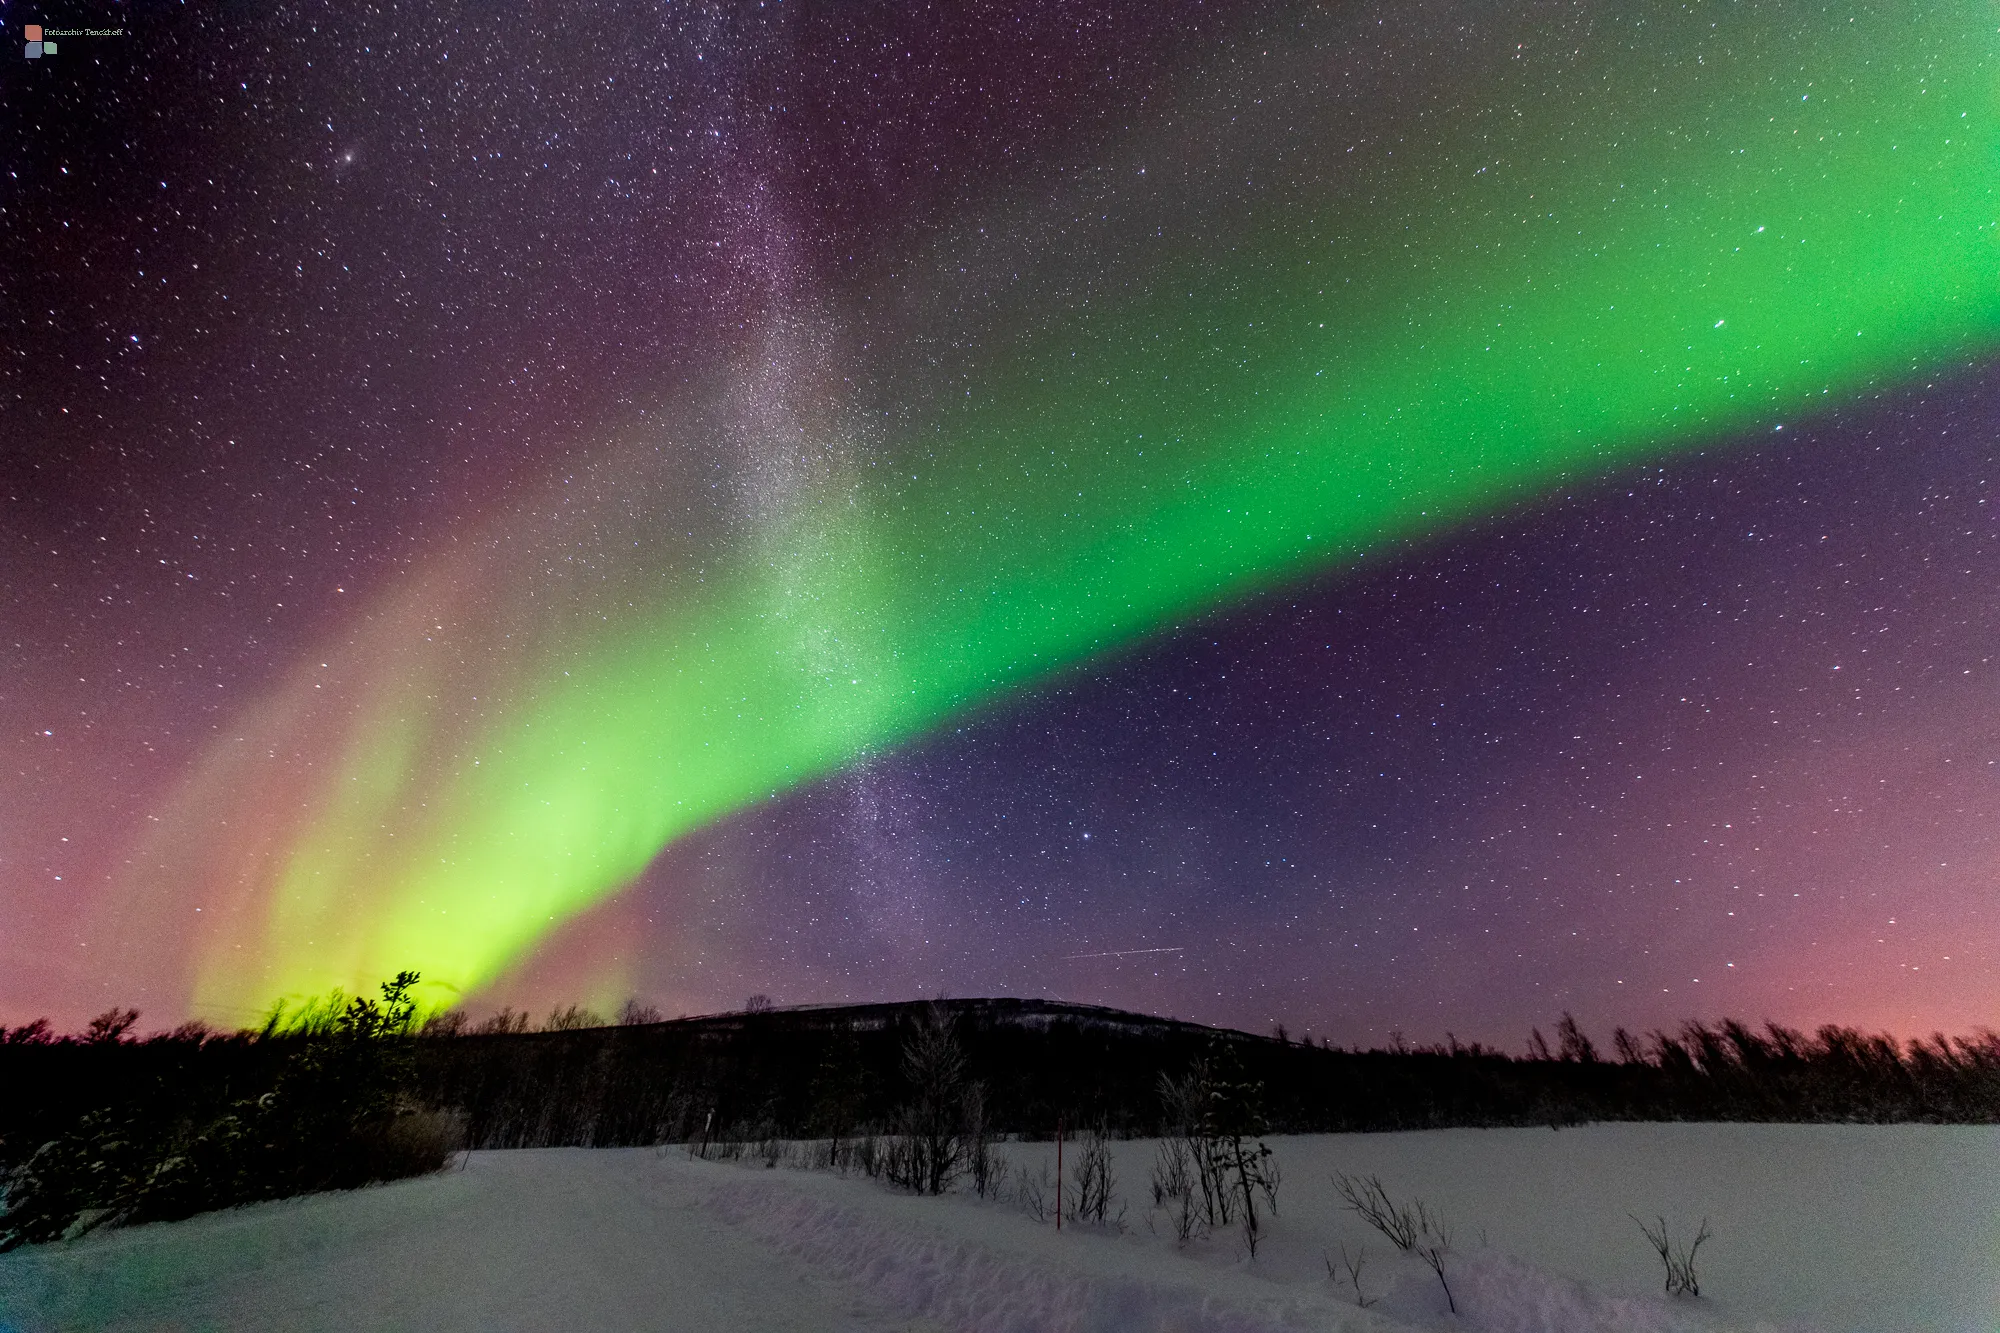 Pictures of northern lights | Photo Archive Tenckhoff